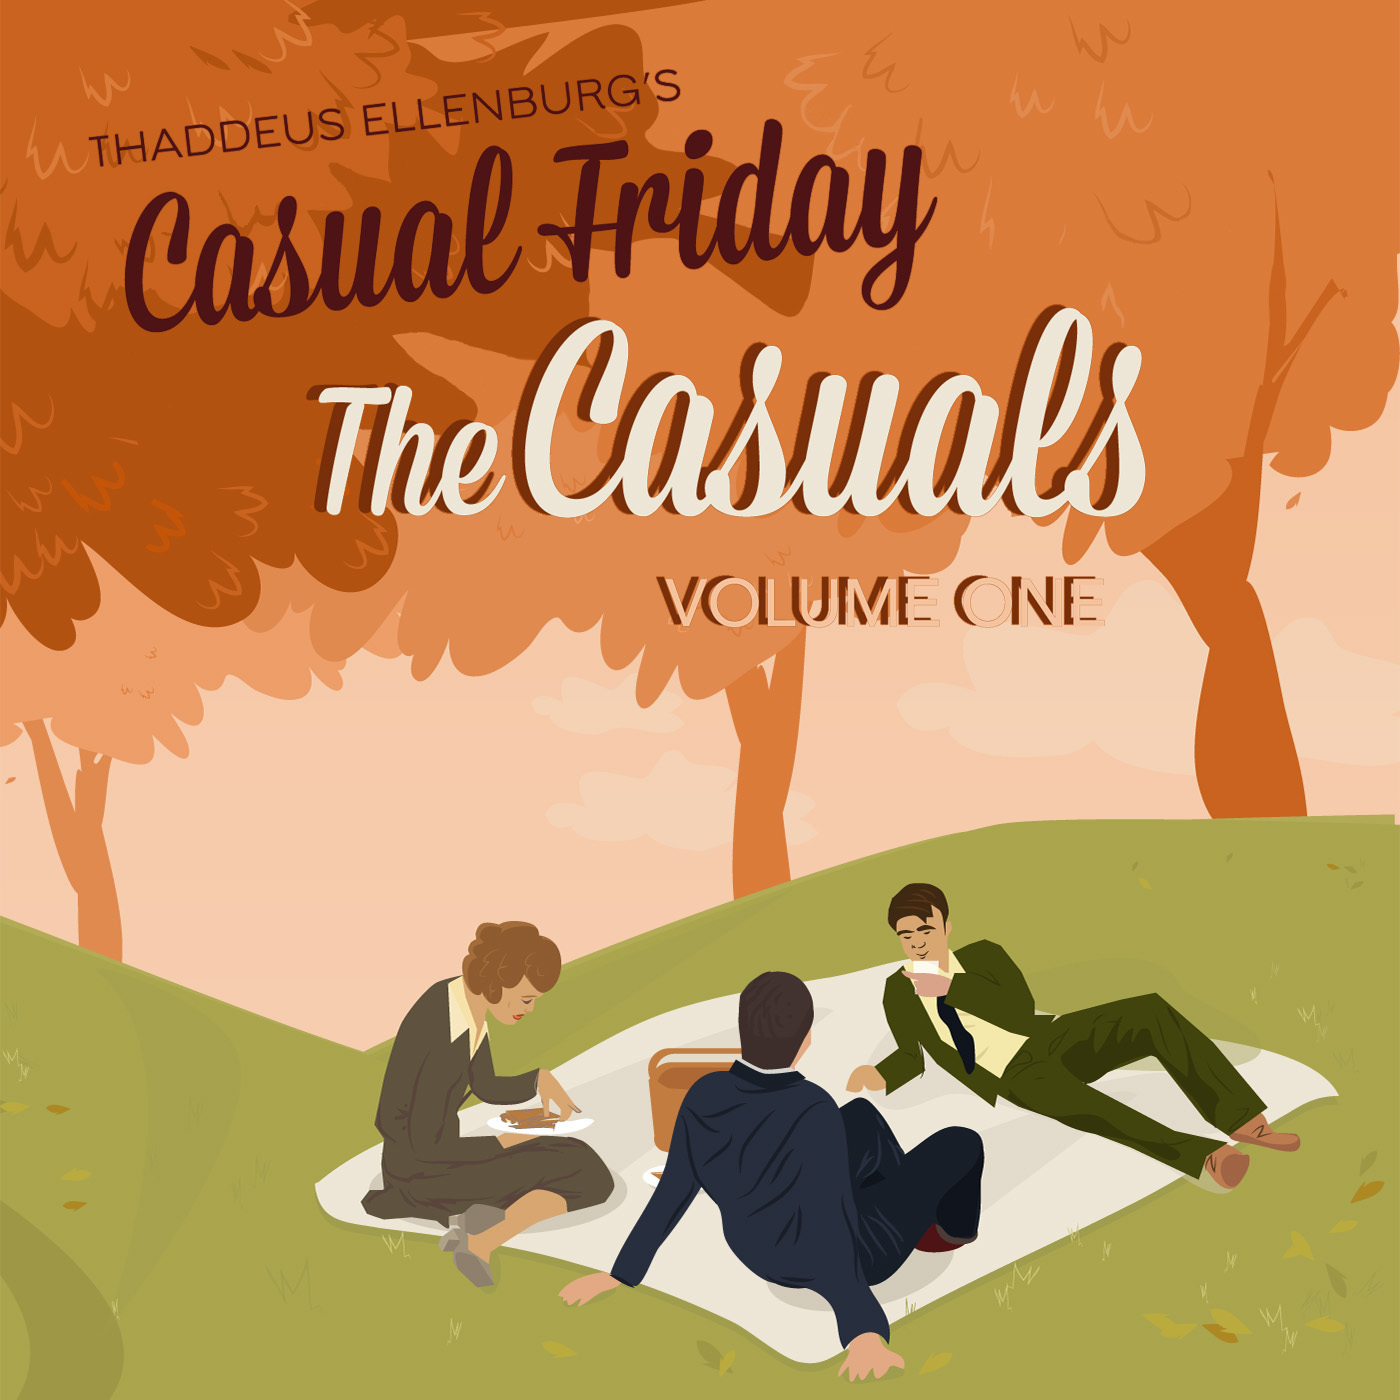 Available Now for Your Bookshelf! Thaddeus Ellenburg’s Casual Friday: The Casuals (Volume 1)